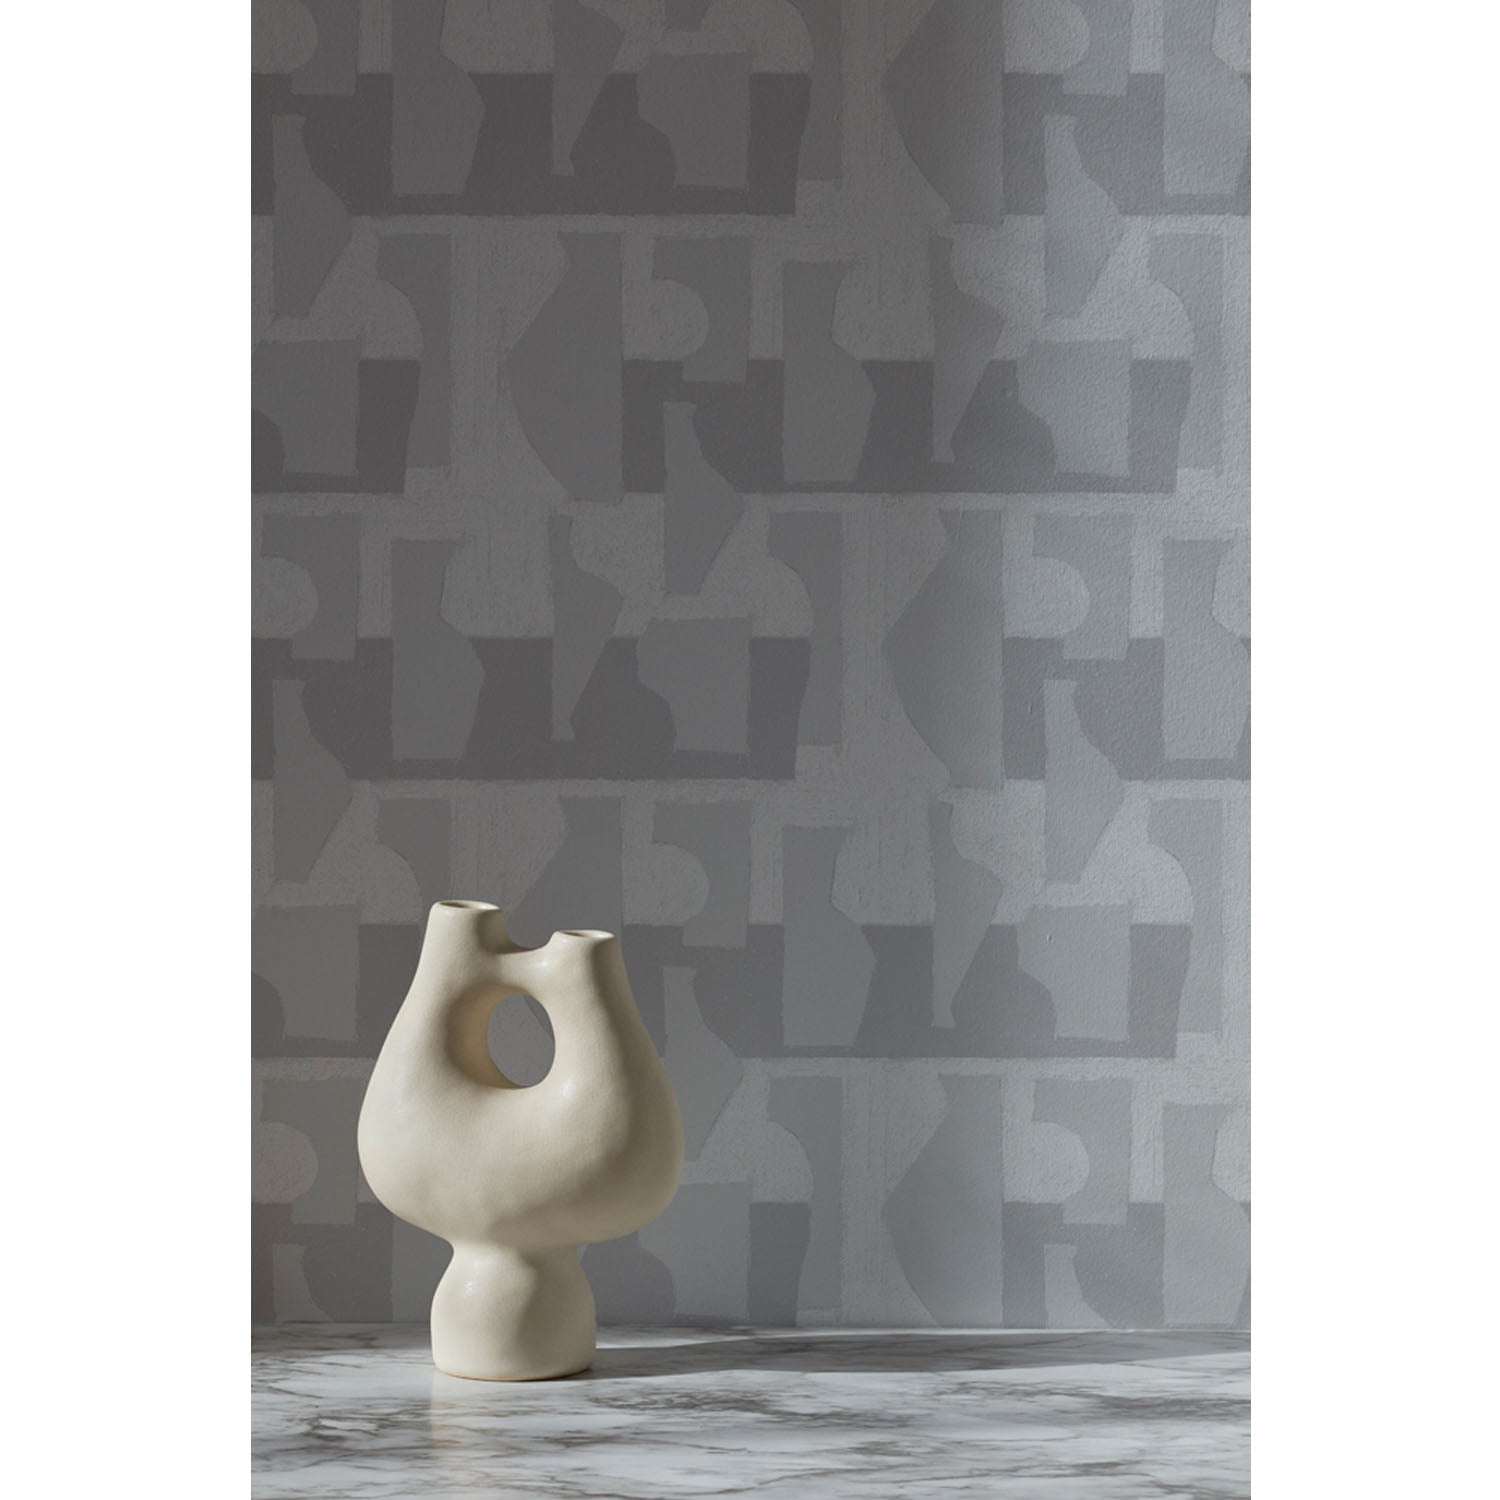 White vase in front of a wall with a pattern of pale grey geometric vessel shapes over a white background with soft grey horizontal stripes.